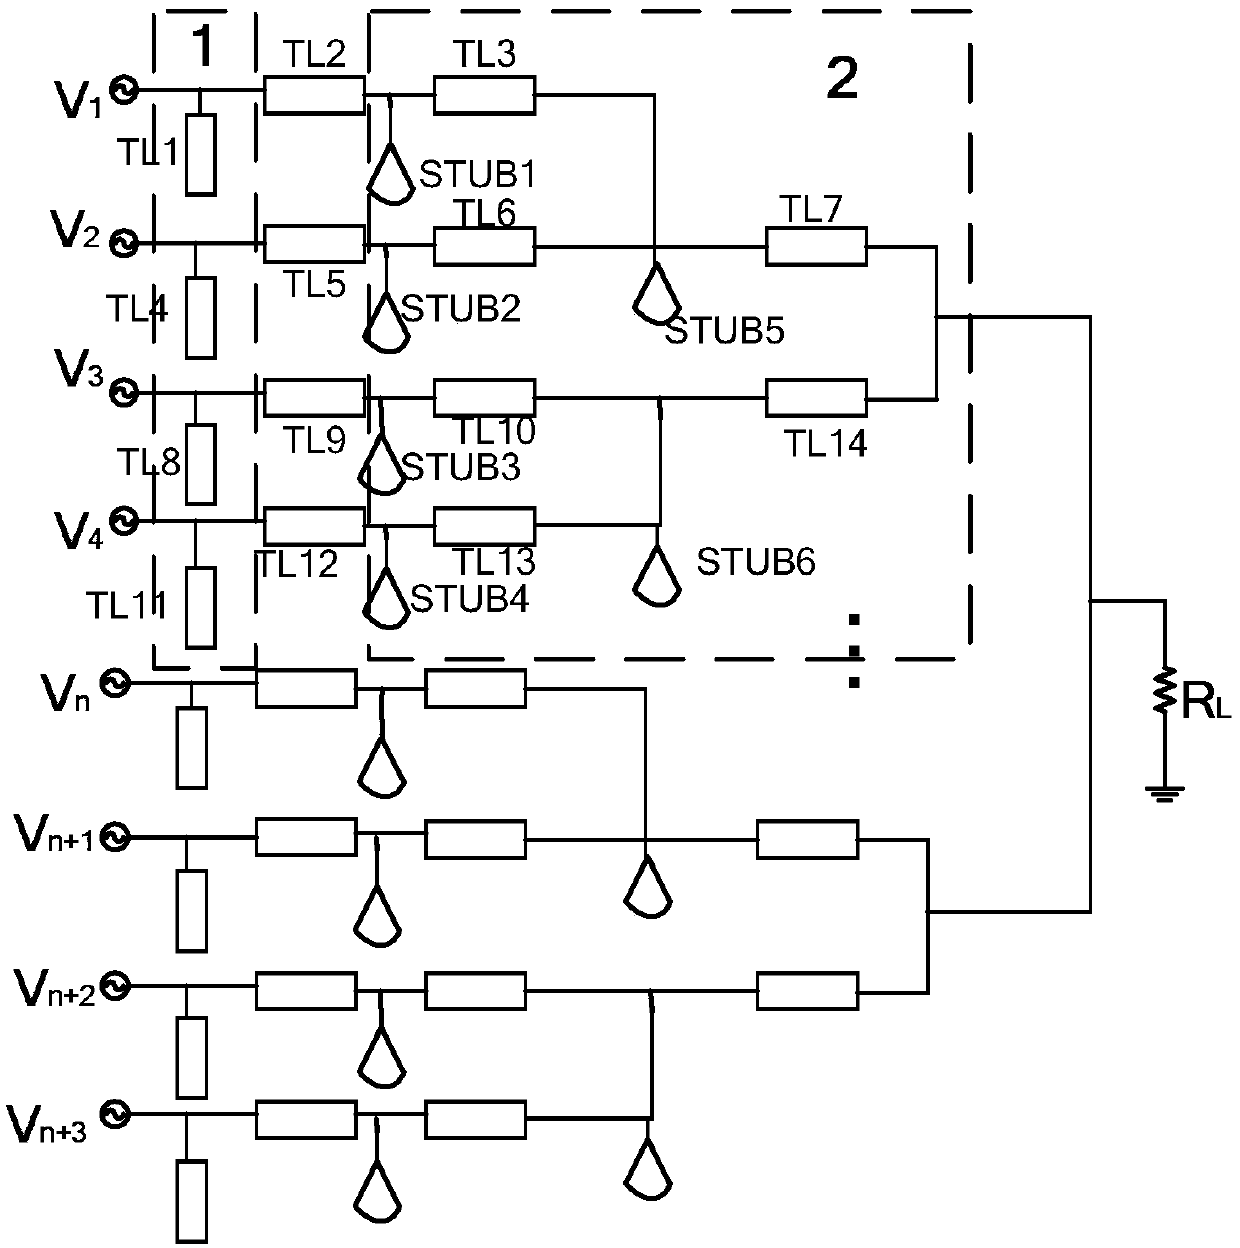 Multi-channel power combining circuit applied to out-of-phase power amplification system